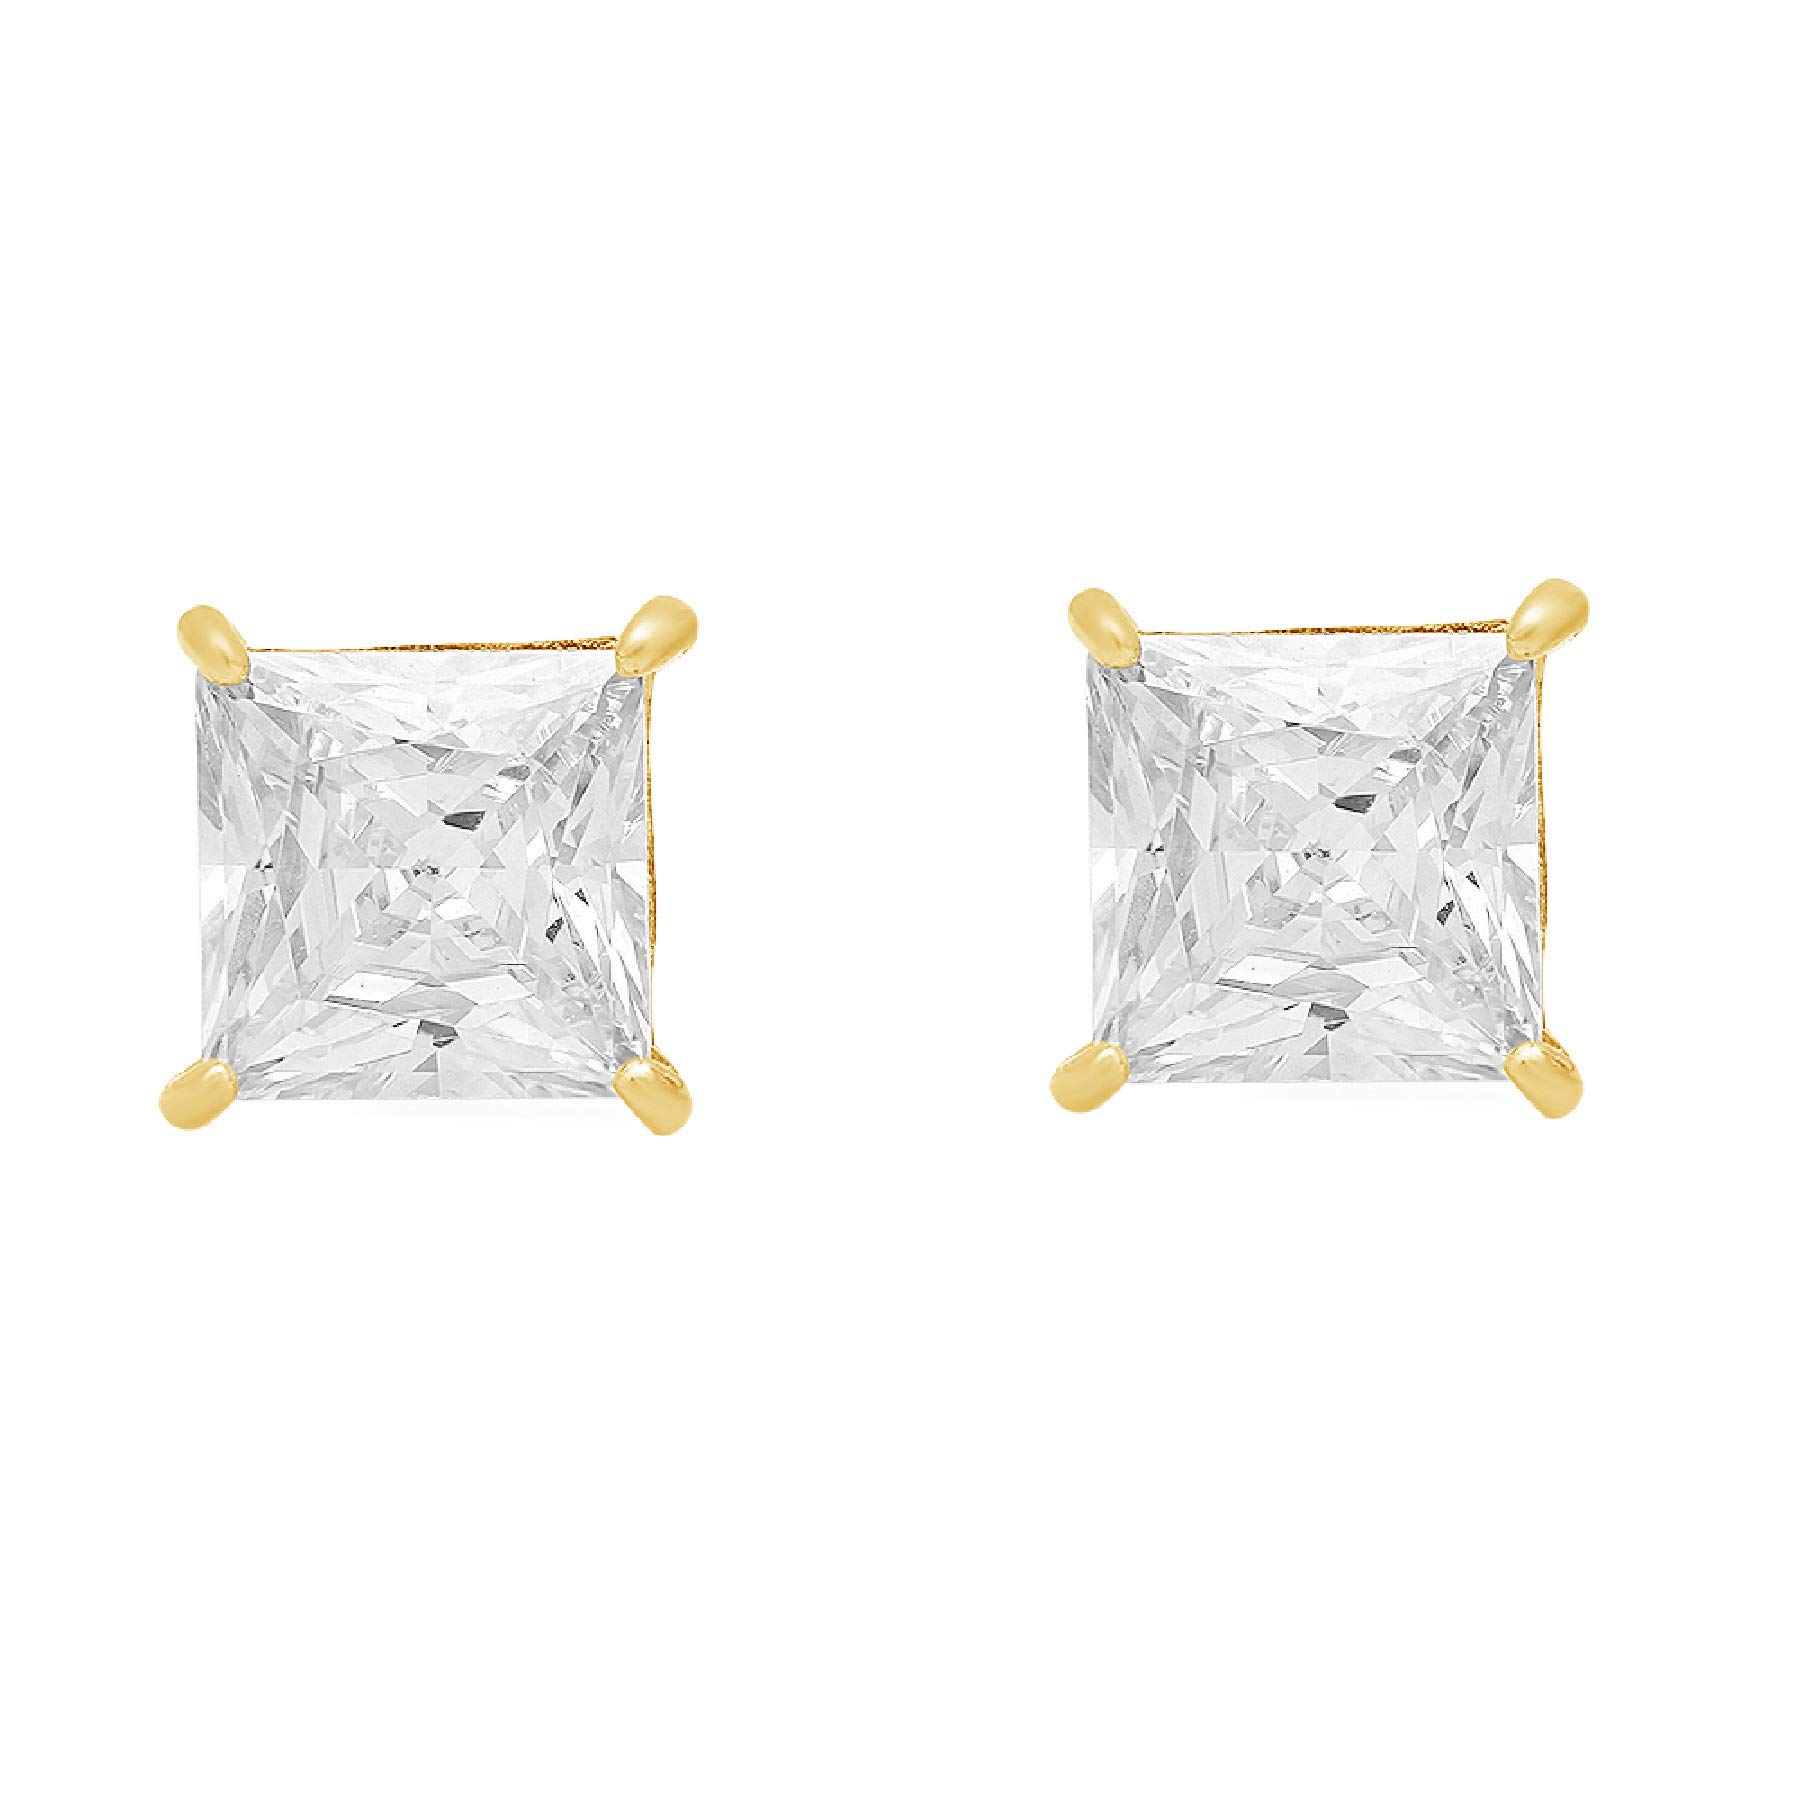 1.9ct Princess Cut Solitaire Genuine White Created Sapphire Unisex Designer Stud Earrings Solid 14k Yellow Gold Screw Back conflict free Jewelry